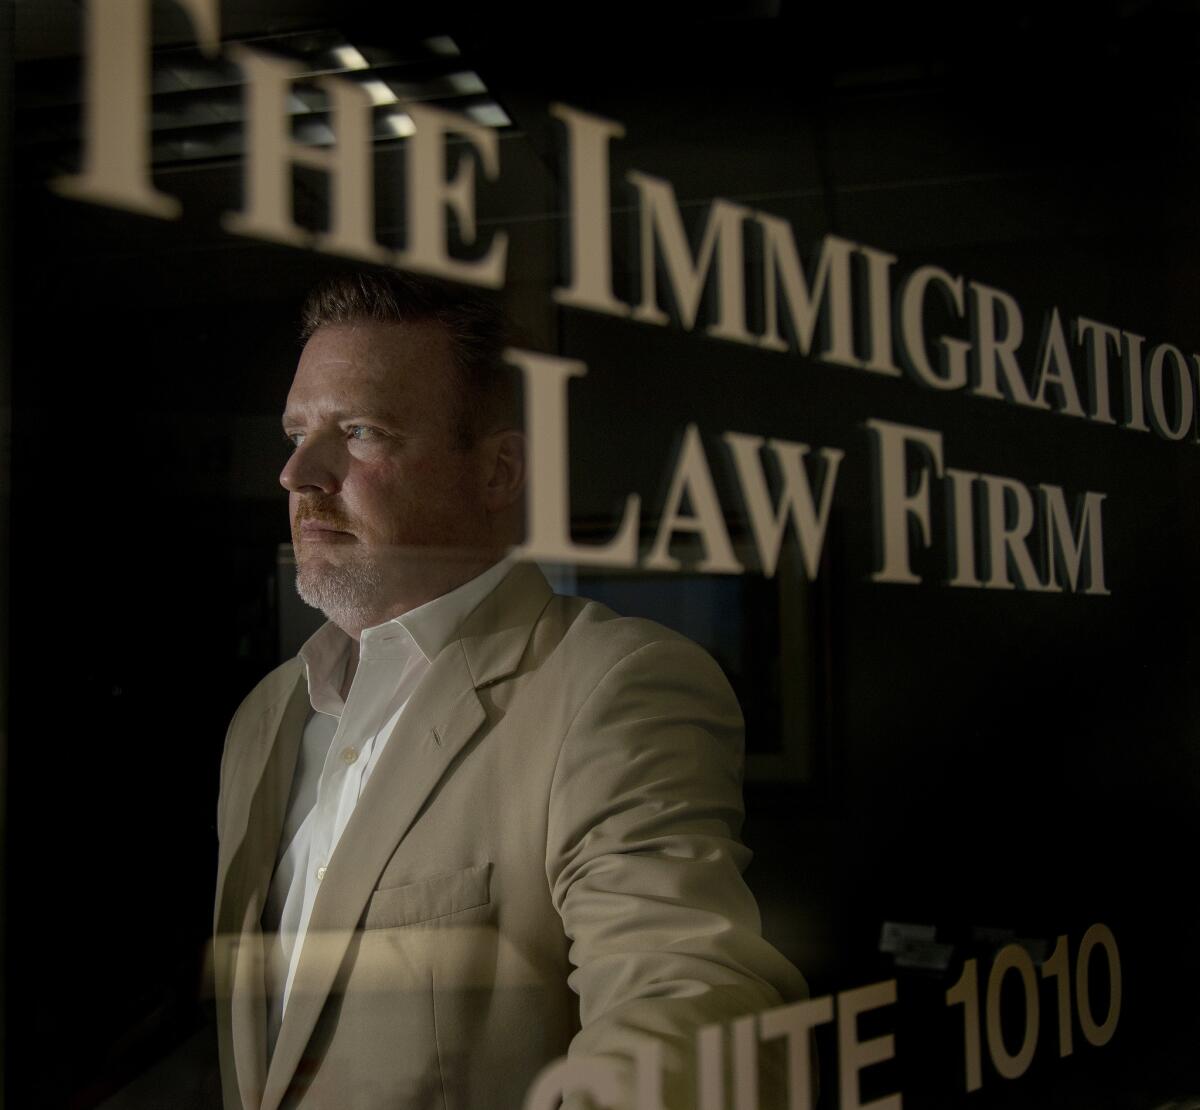 Immigration attorney Len Saunders, whose offices are in Blaine, Wash., sees several cases similar to Powers' each week.